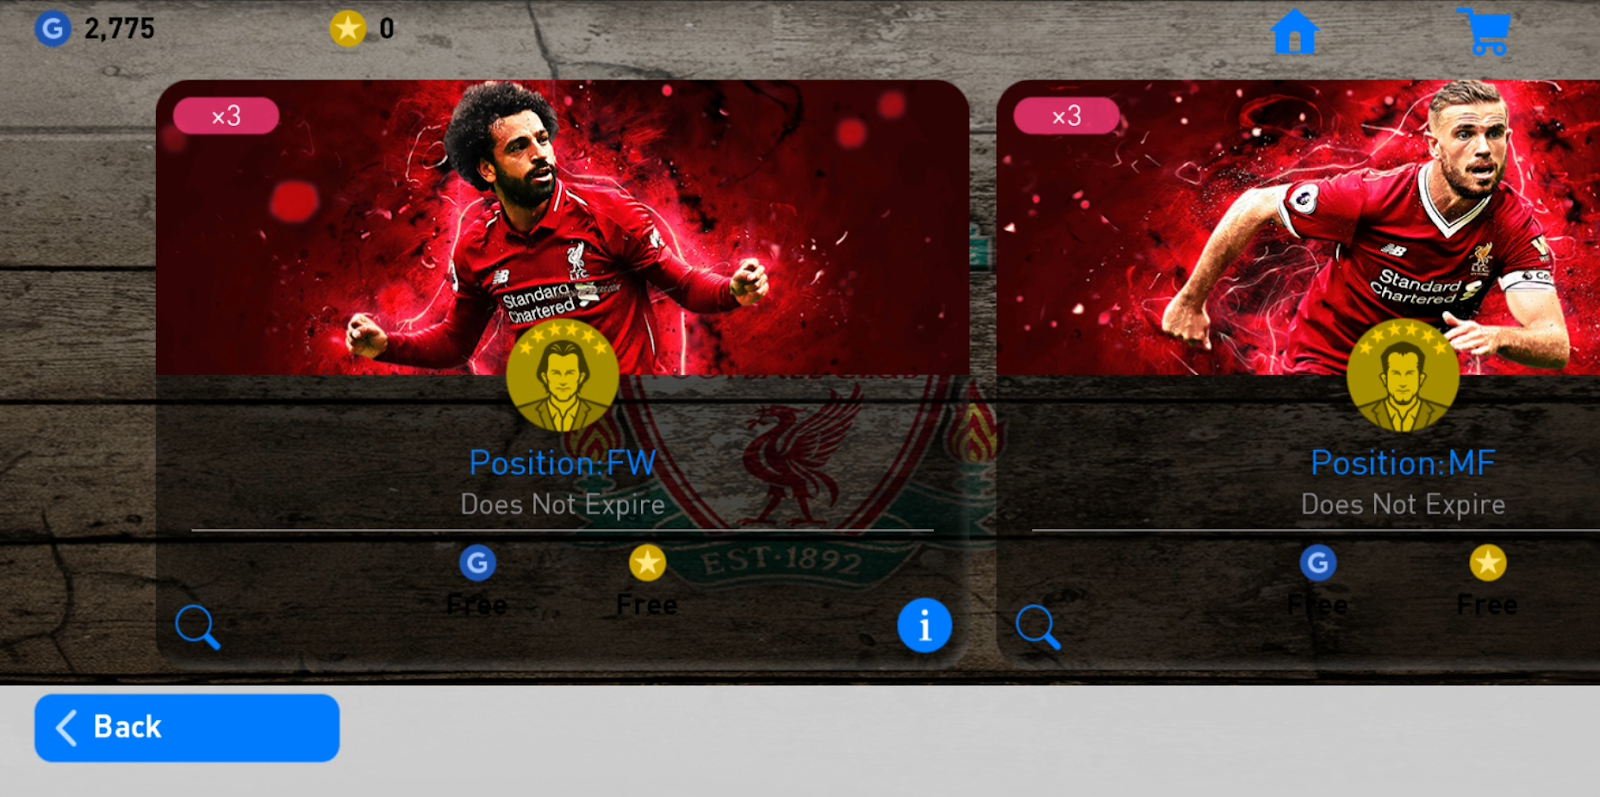 PES 2019 Mobile Patch V3.2.1 New Kits Update Android Best Graphics [MOD Liverpool FC]